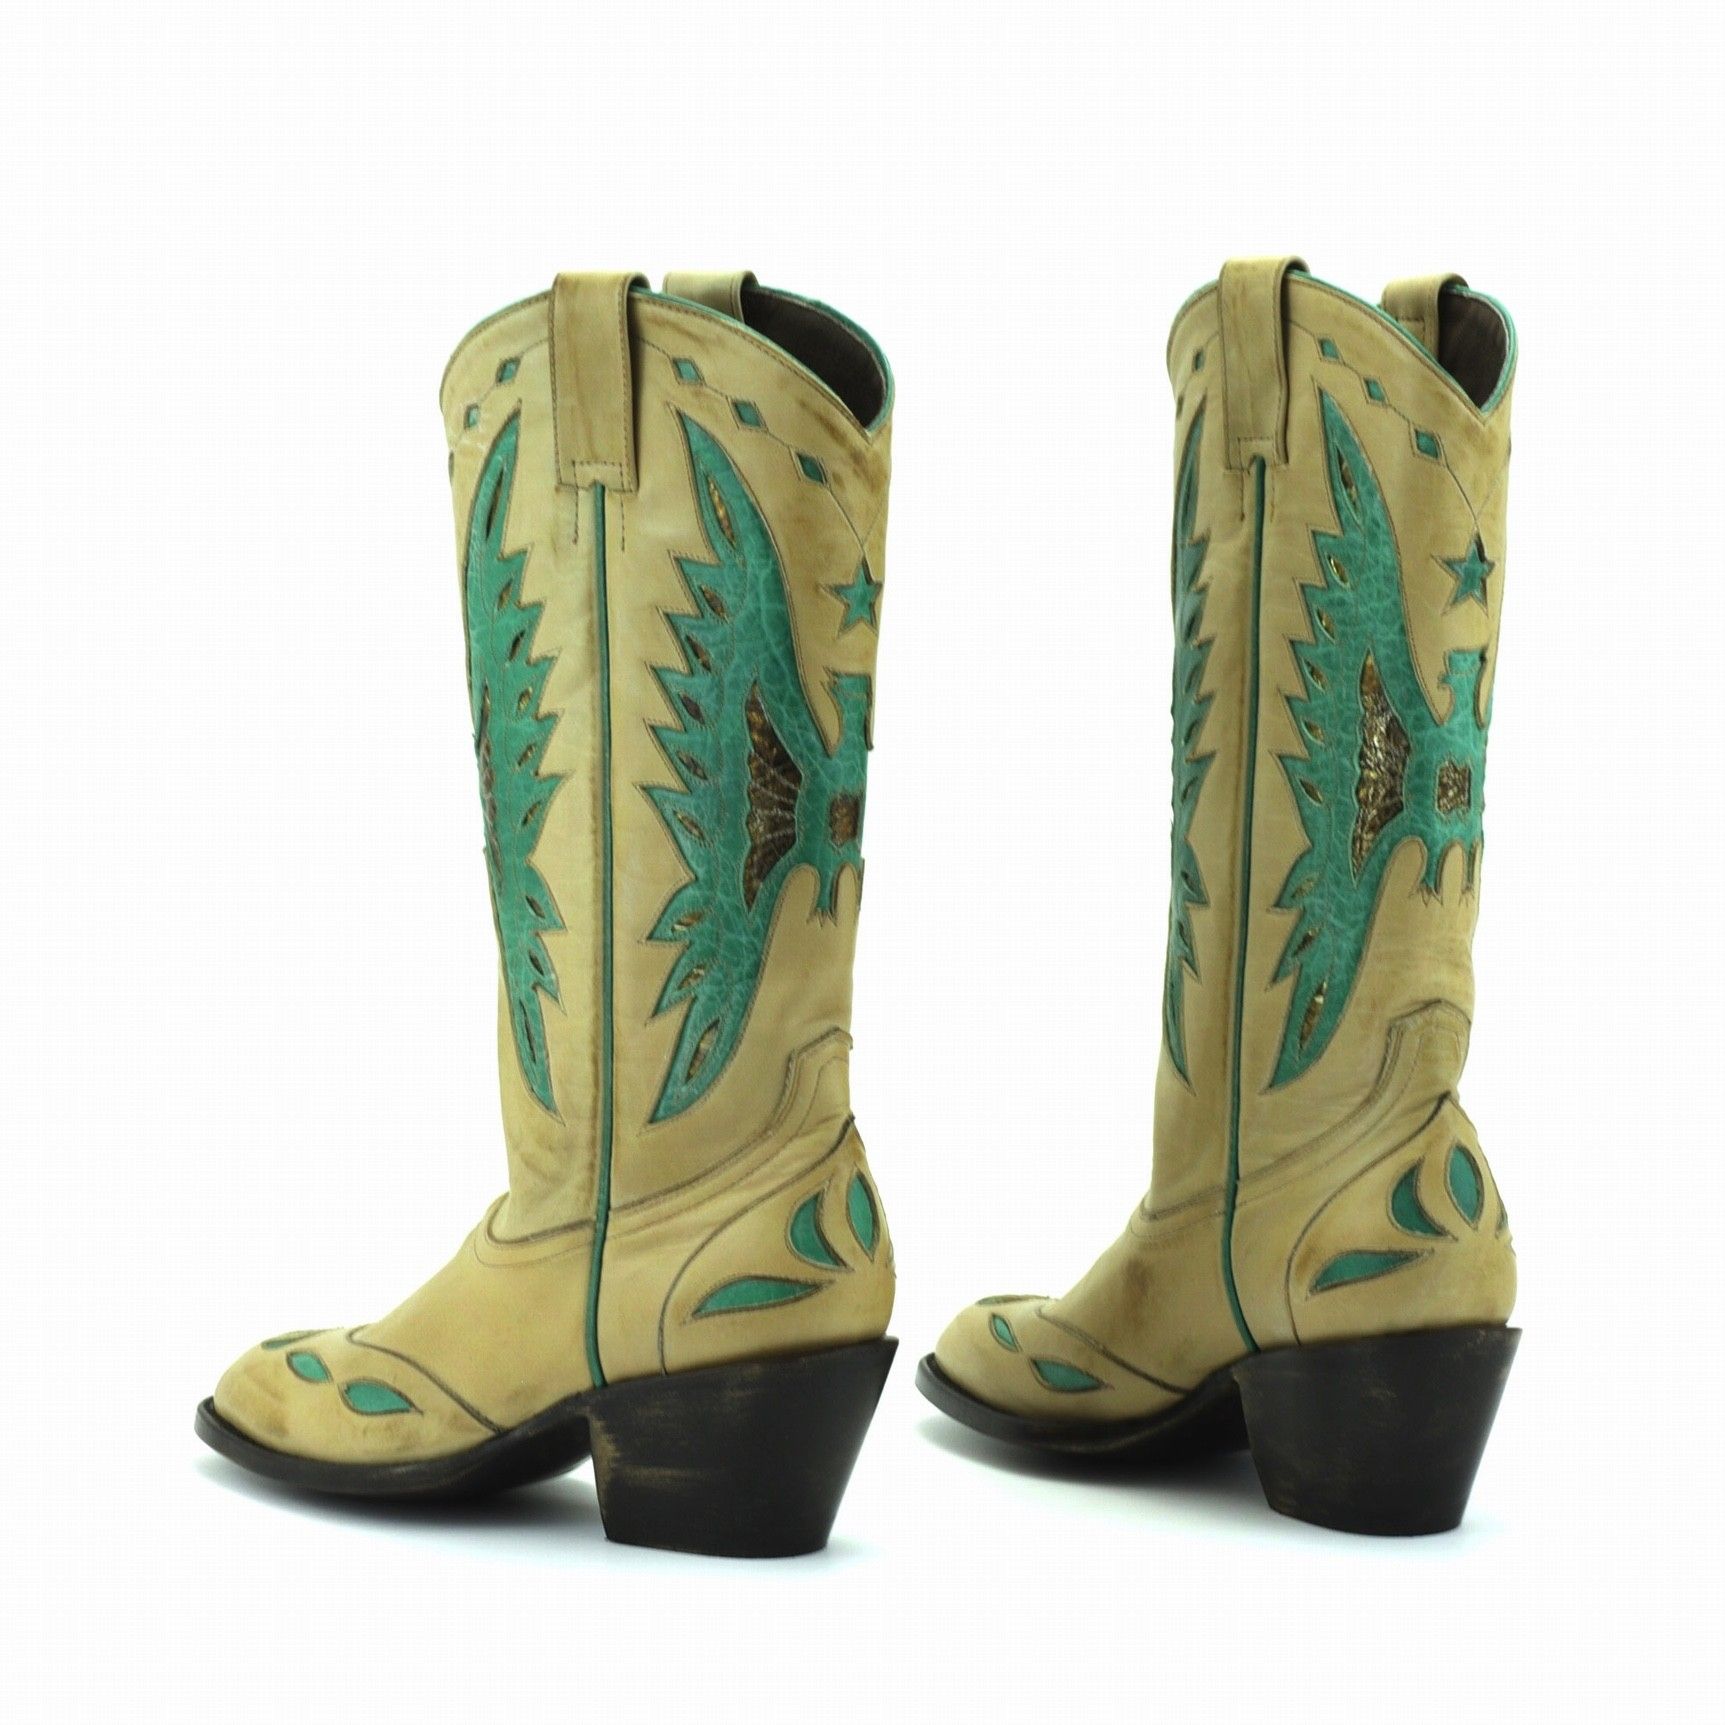 MICKEY CAMEL TURQUOISE POINTED TOE BOOTS WITH EAGLE AND  FLAMING OUTCUTS  Total heel height 2.6 Inches  100% cow leather  Color 